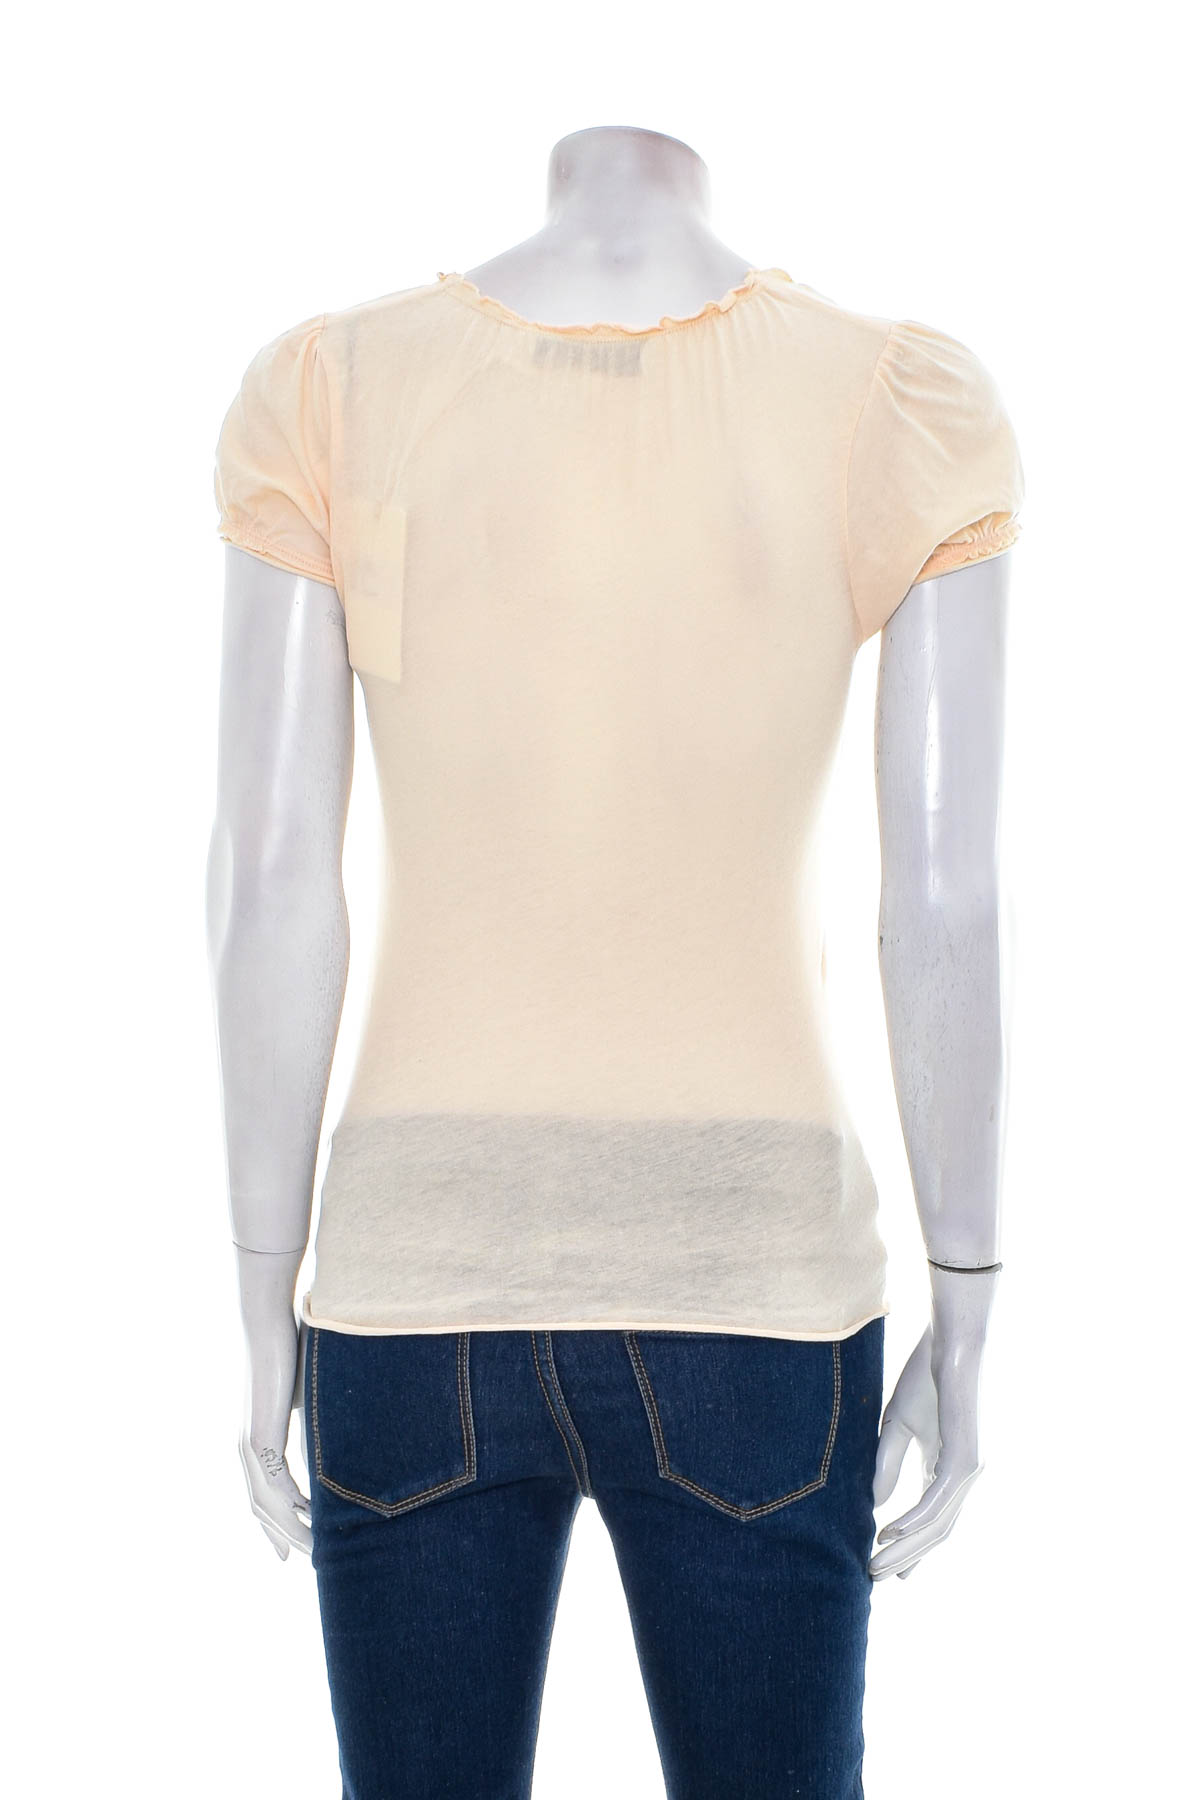 Women's t-shirt - ALLUDE - 1